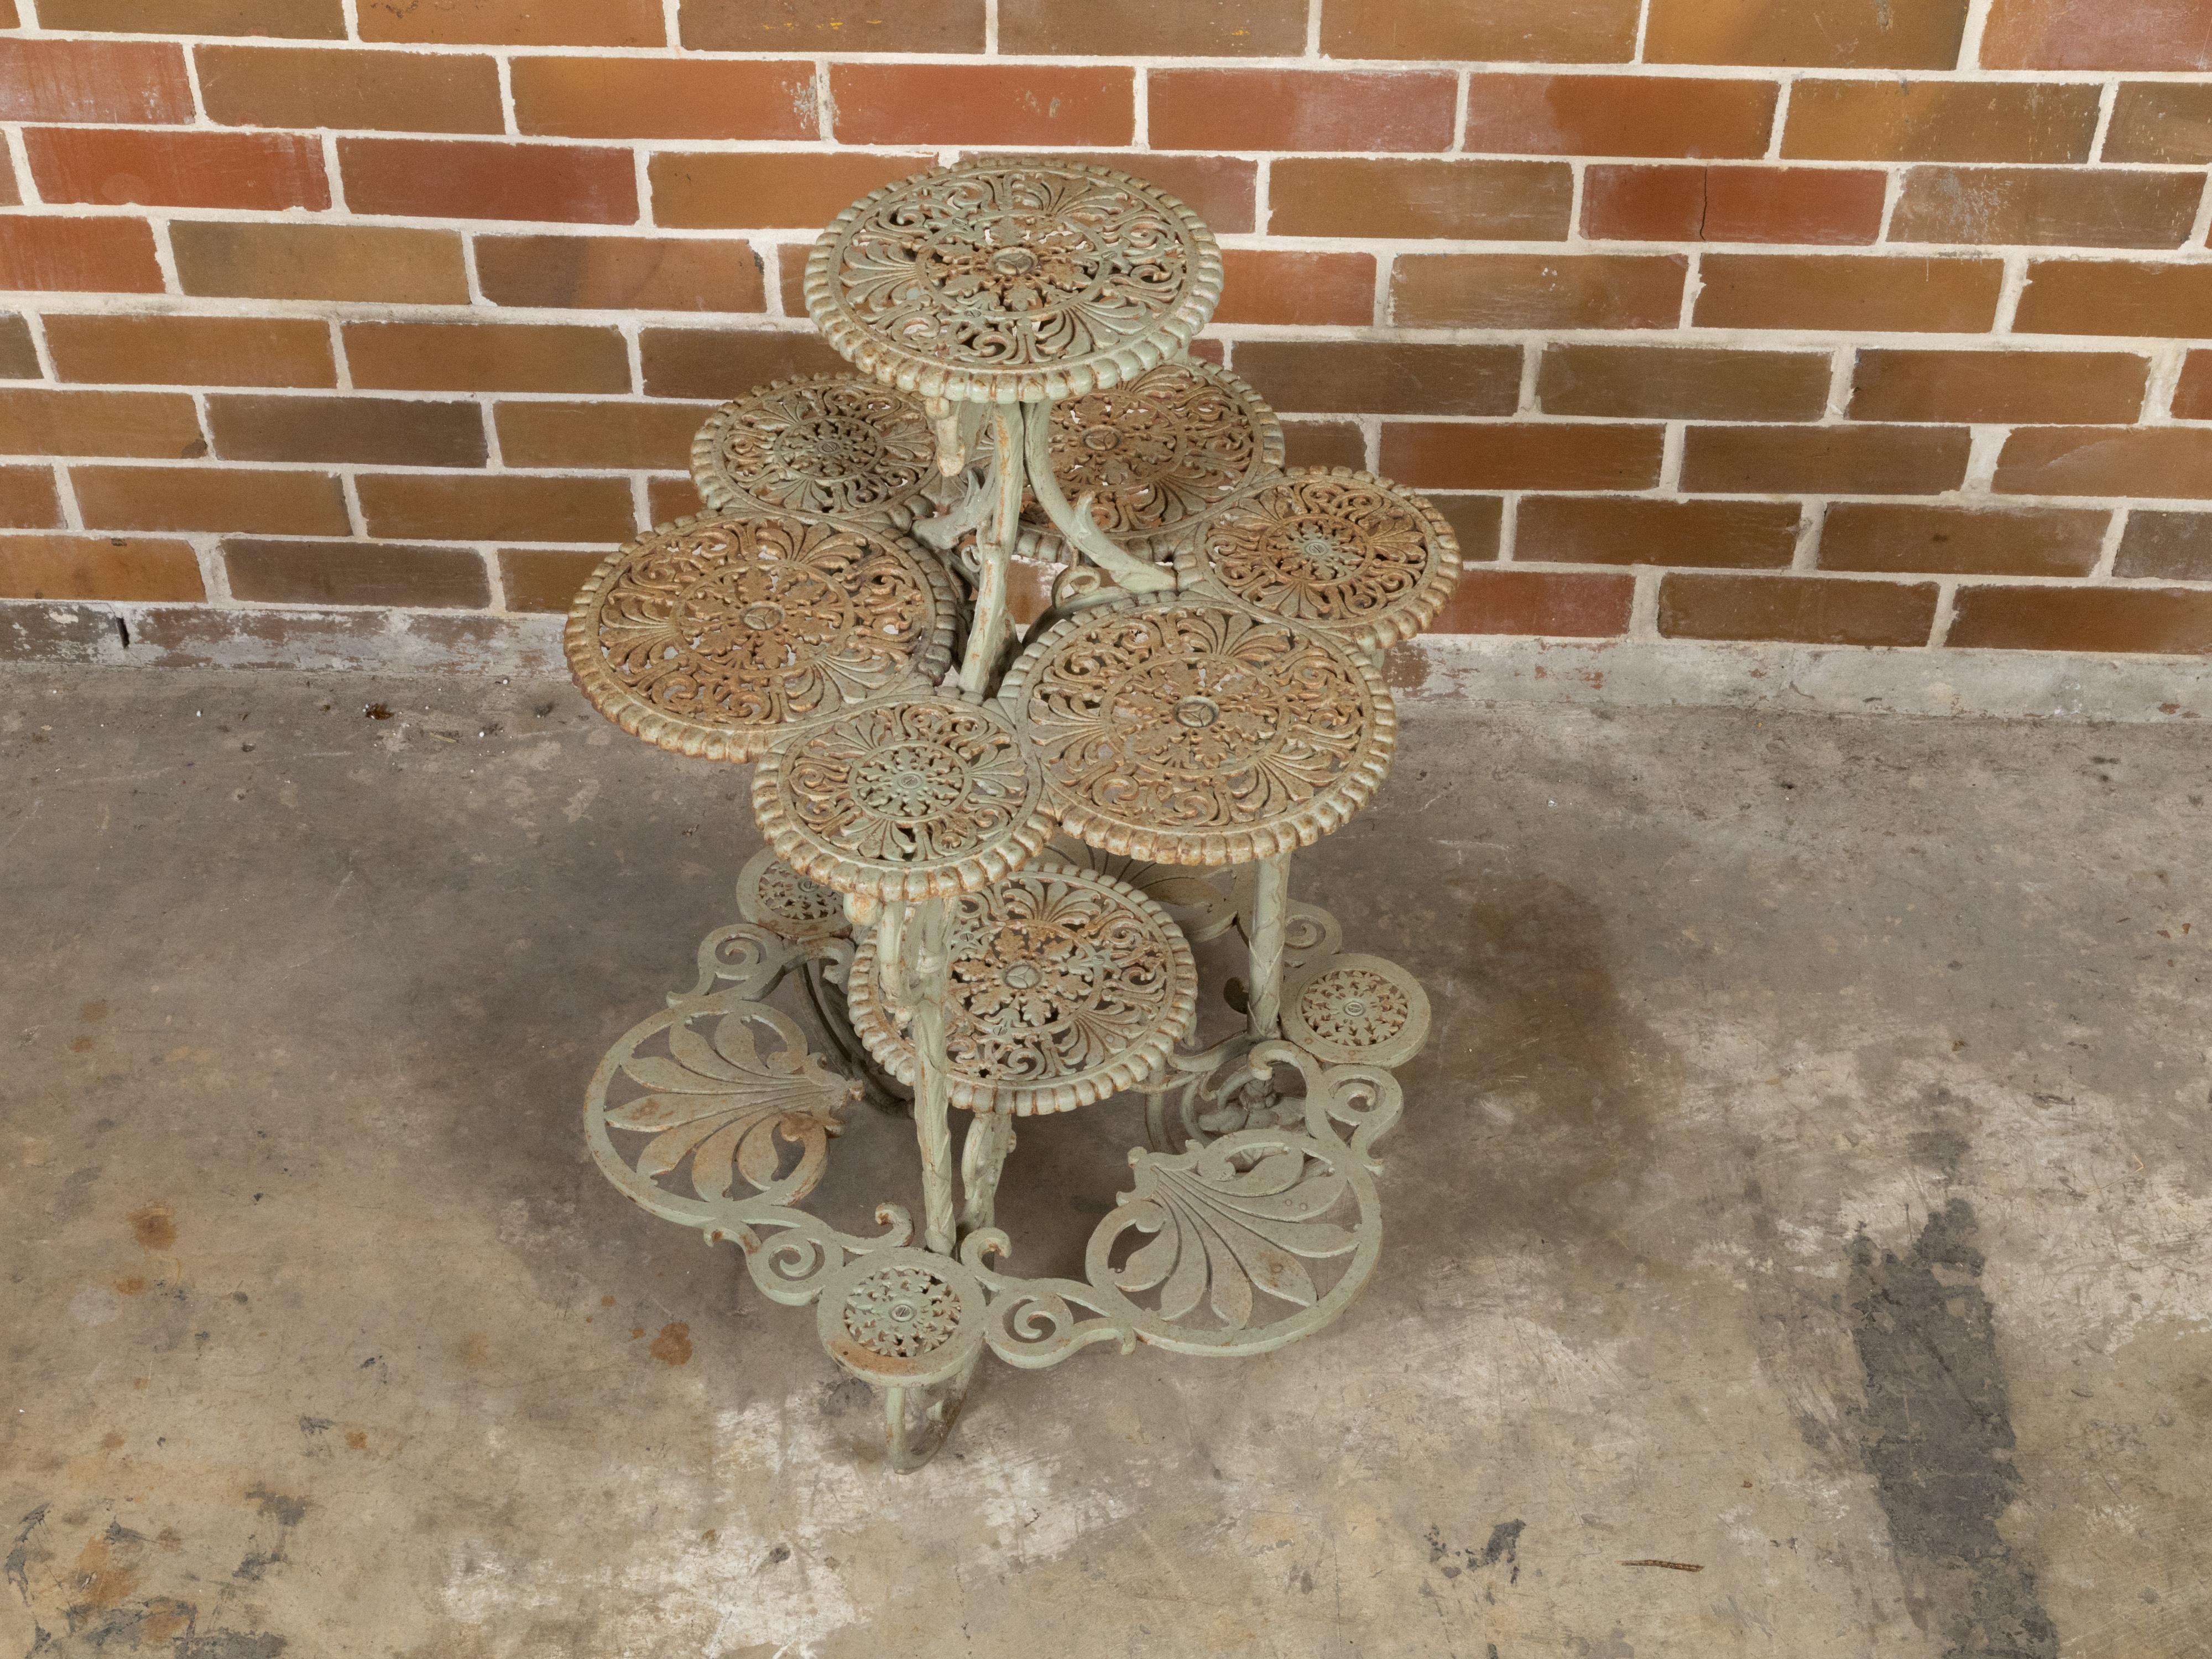 English 19th Century Painted Iron Four-Tiered Table with Foliage Openwork Motifs In Good Condition For Sale In Atlanta, GA